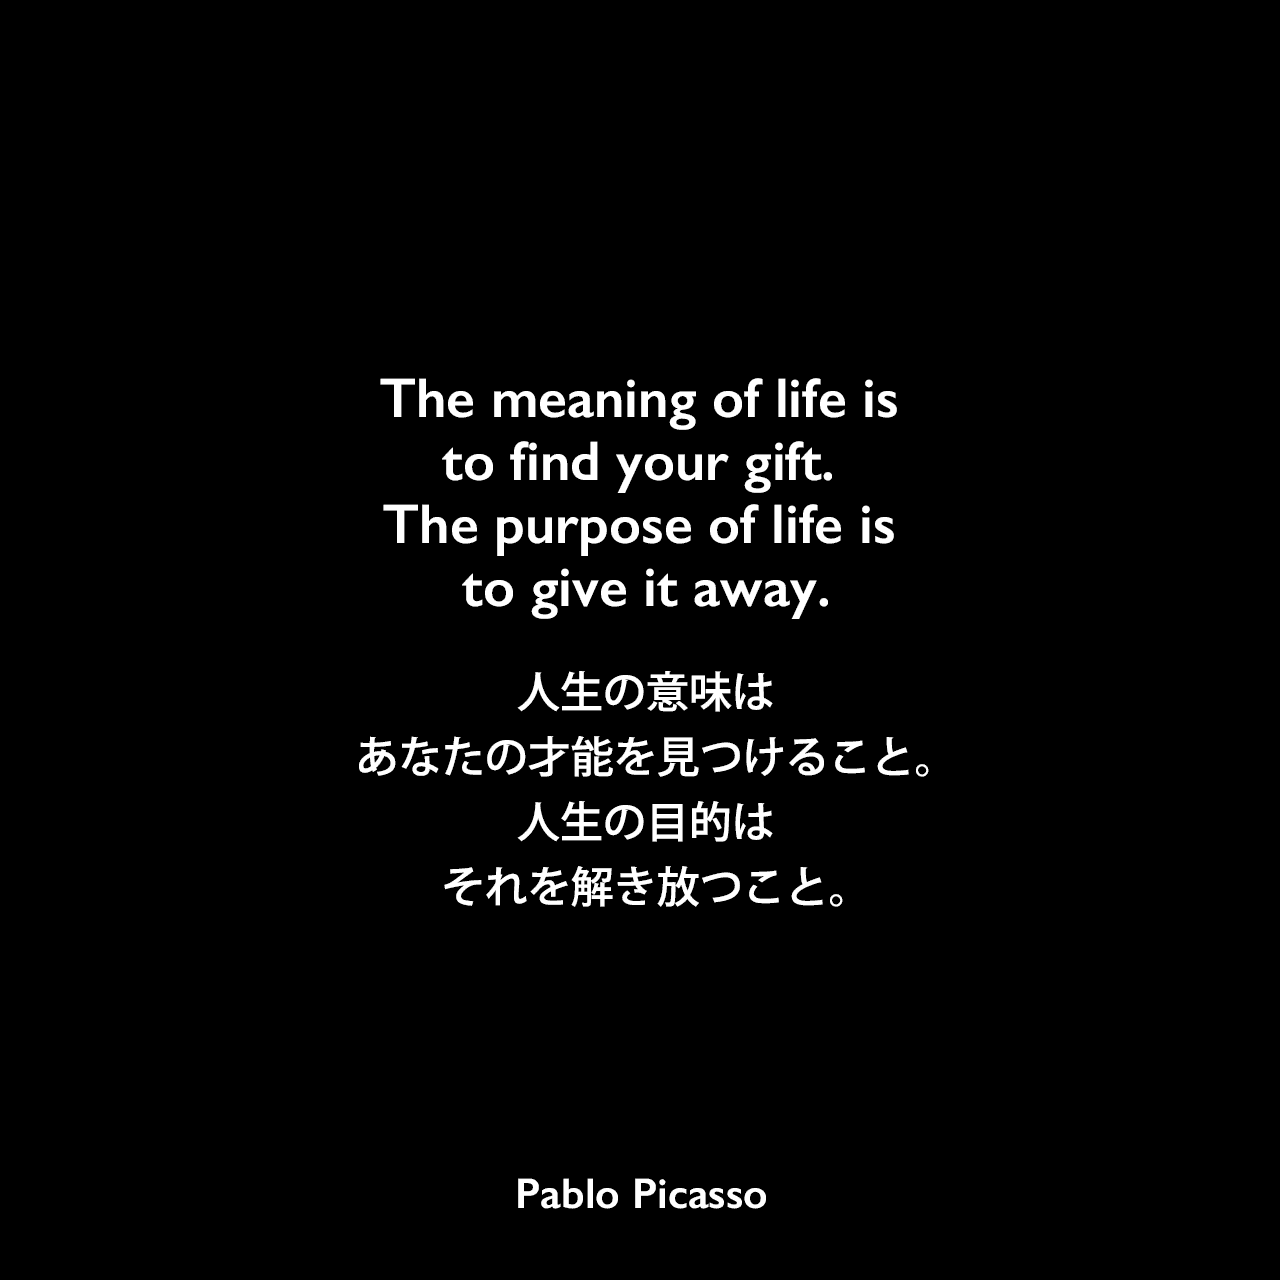 The meaning of life is to find your gift. The purpose of life is to give it away.人生の意味は、あなたの才能を見つけること。人生の目的は、それを解き放つこと。Pablo Picasso